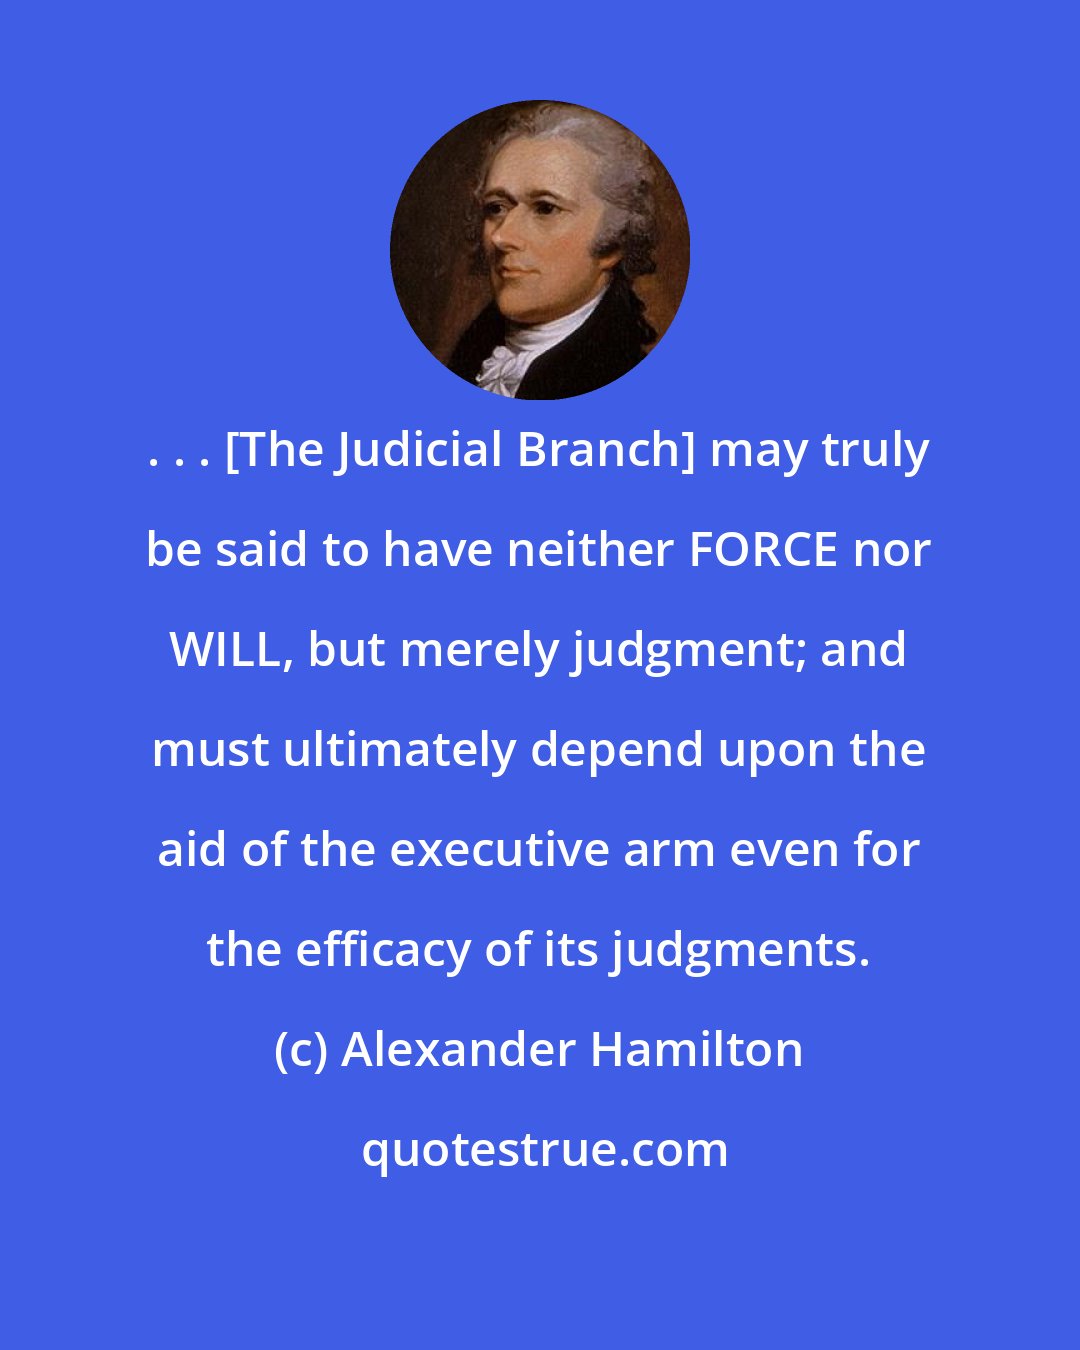 Alexander Hamilton: . . . [The Judicial Branch] may truly be said to have neither FORCE nor WILL, but merely judgment; and must ultimately depend upon the aid of the executive arm even for the efficacy of its judgments.